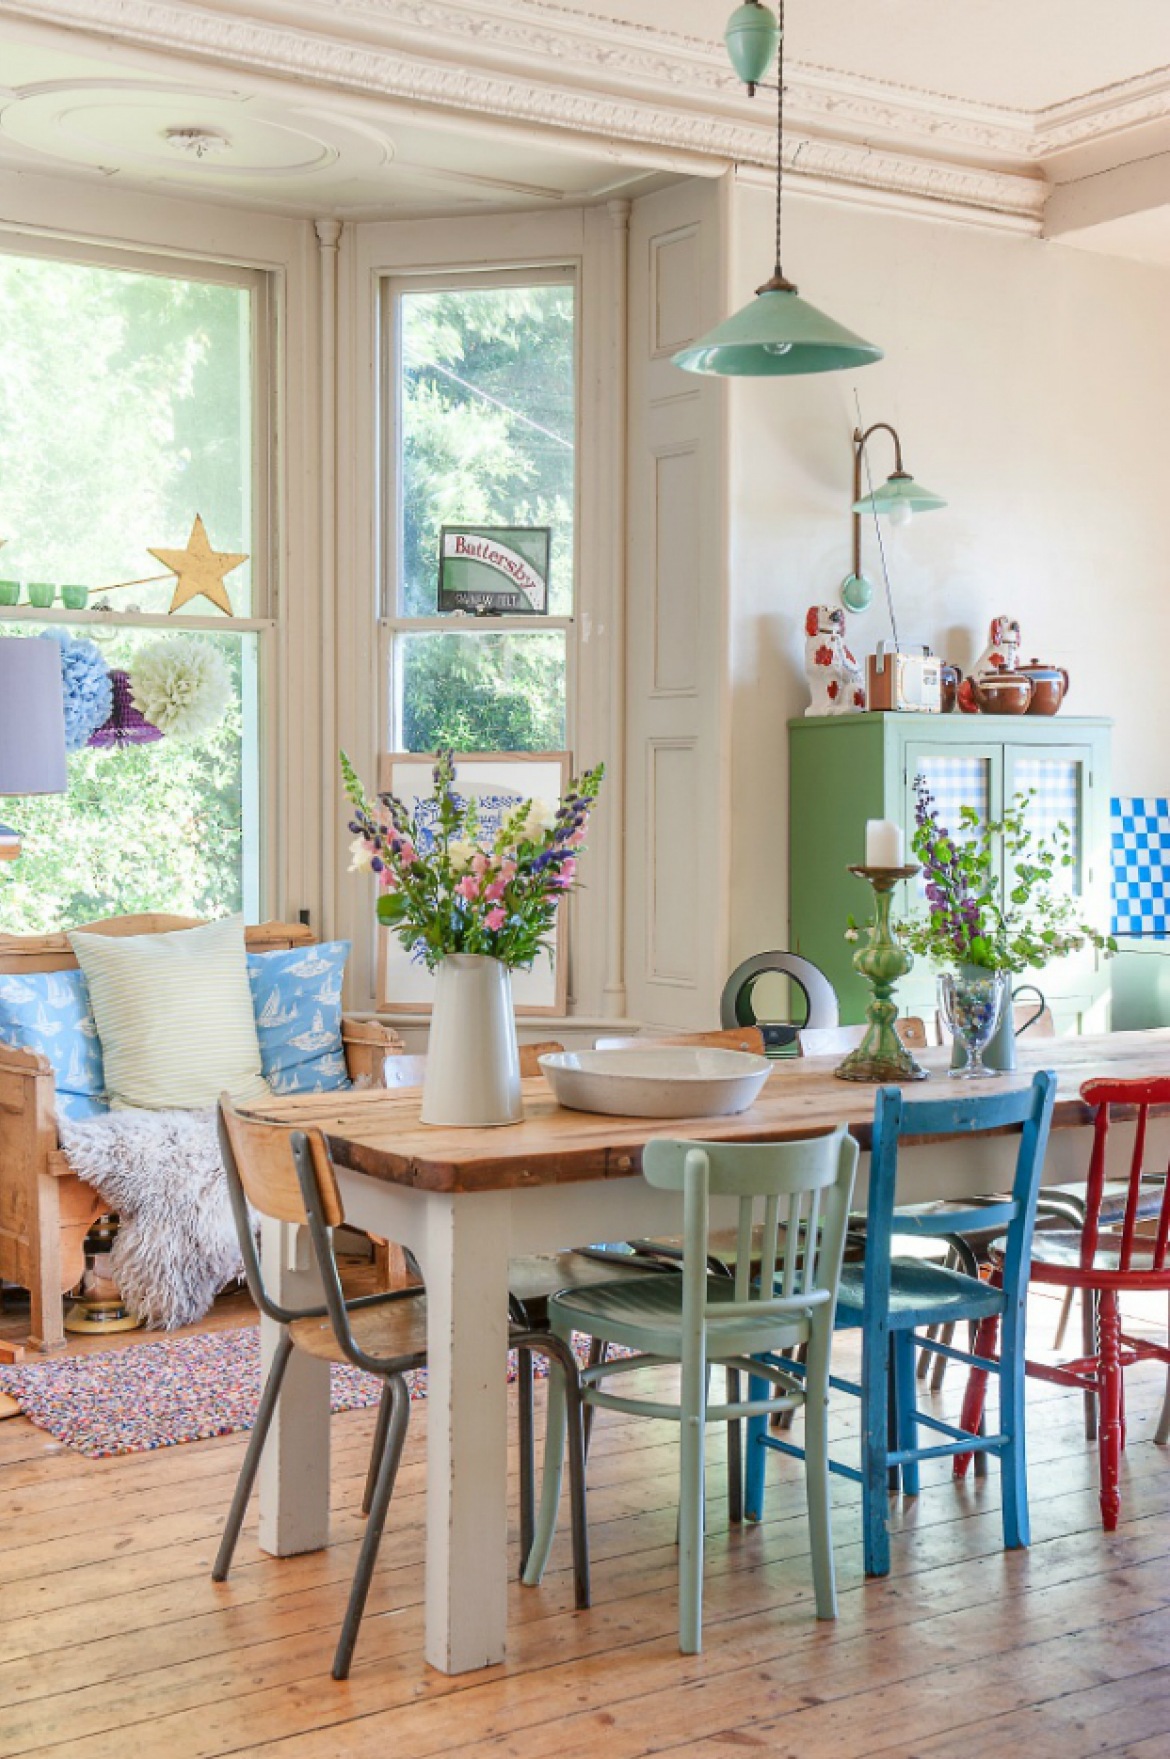 Introducing Colour Into Your Dining Room Decor Has Never Been So Easy 2